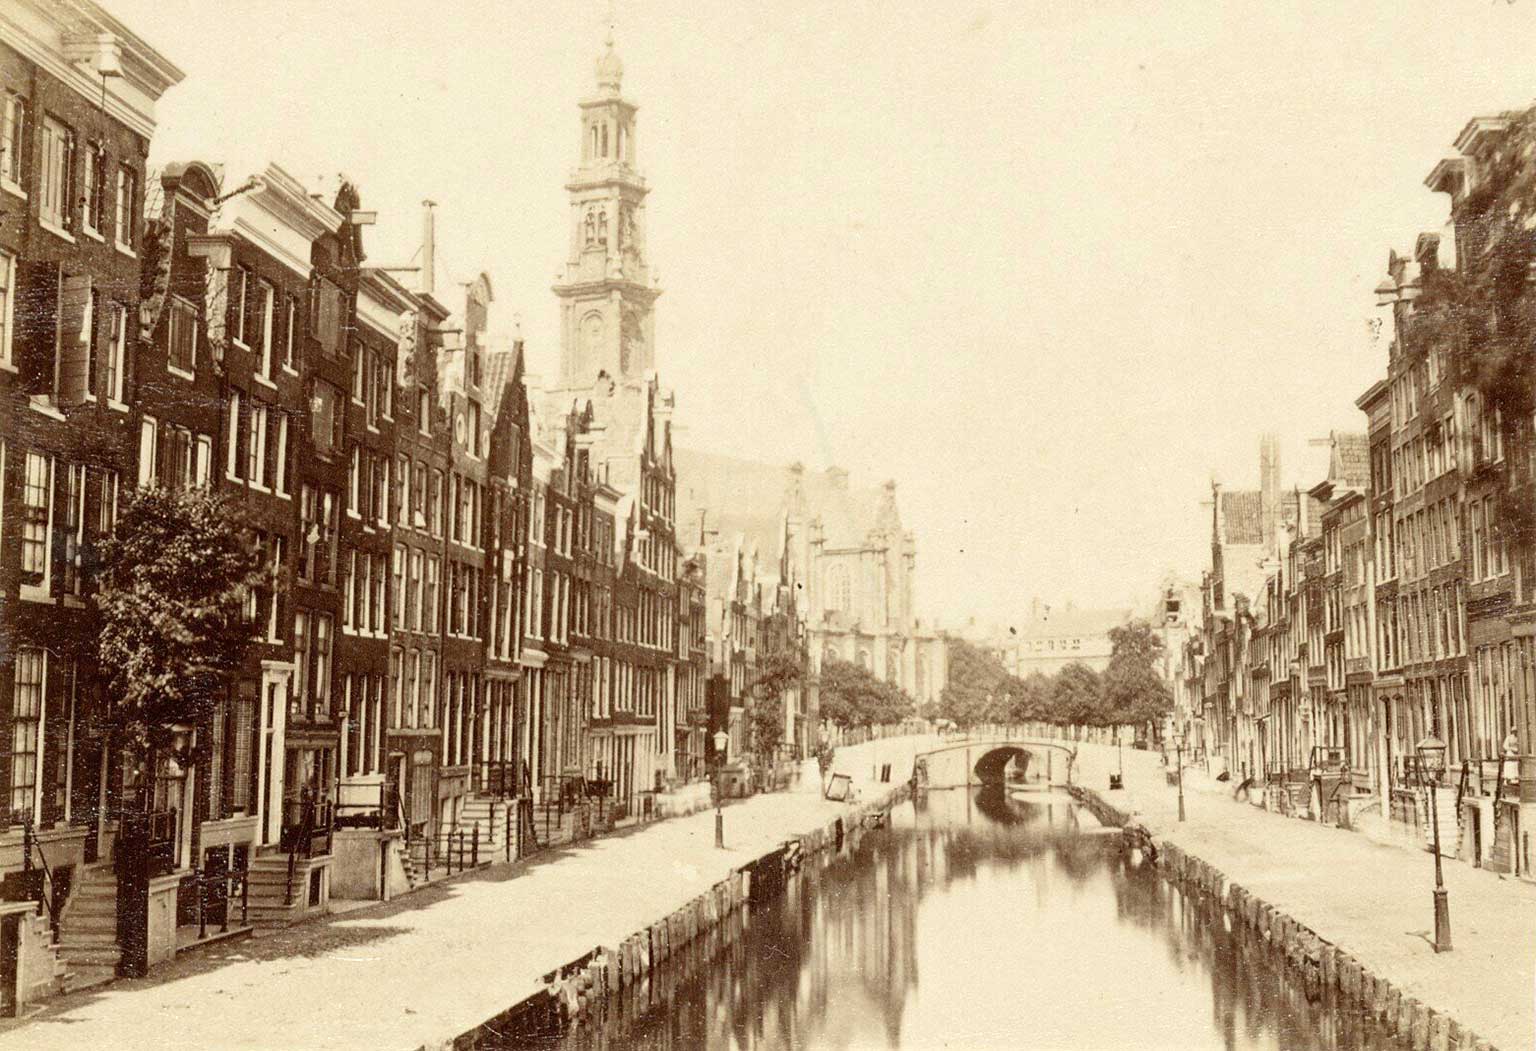 Rozengracht, Amsterdam, still a canal in 1889, seen in the direction of the Westermarkt